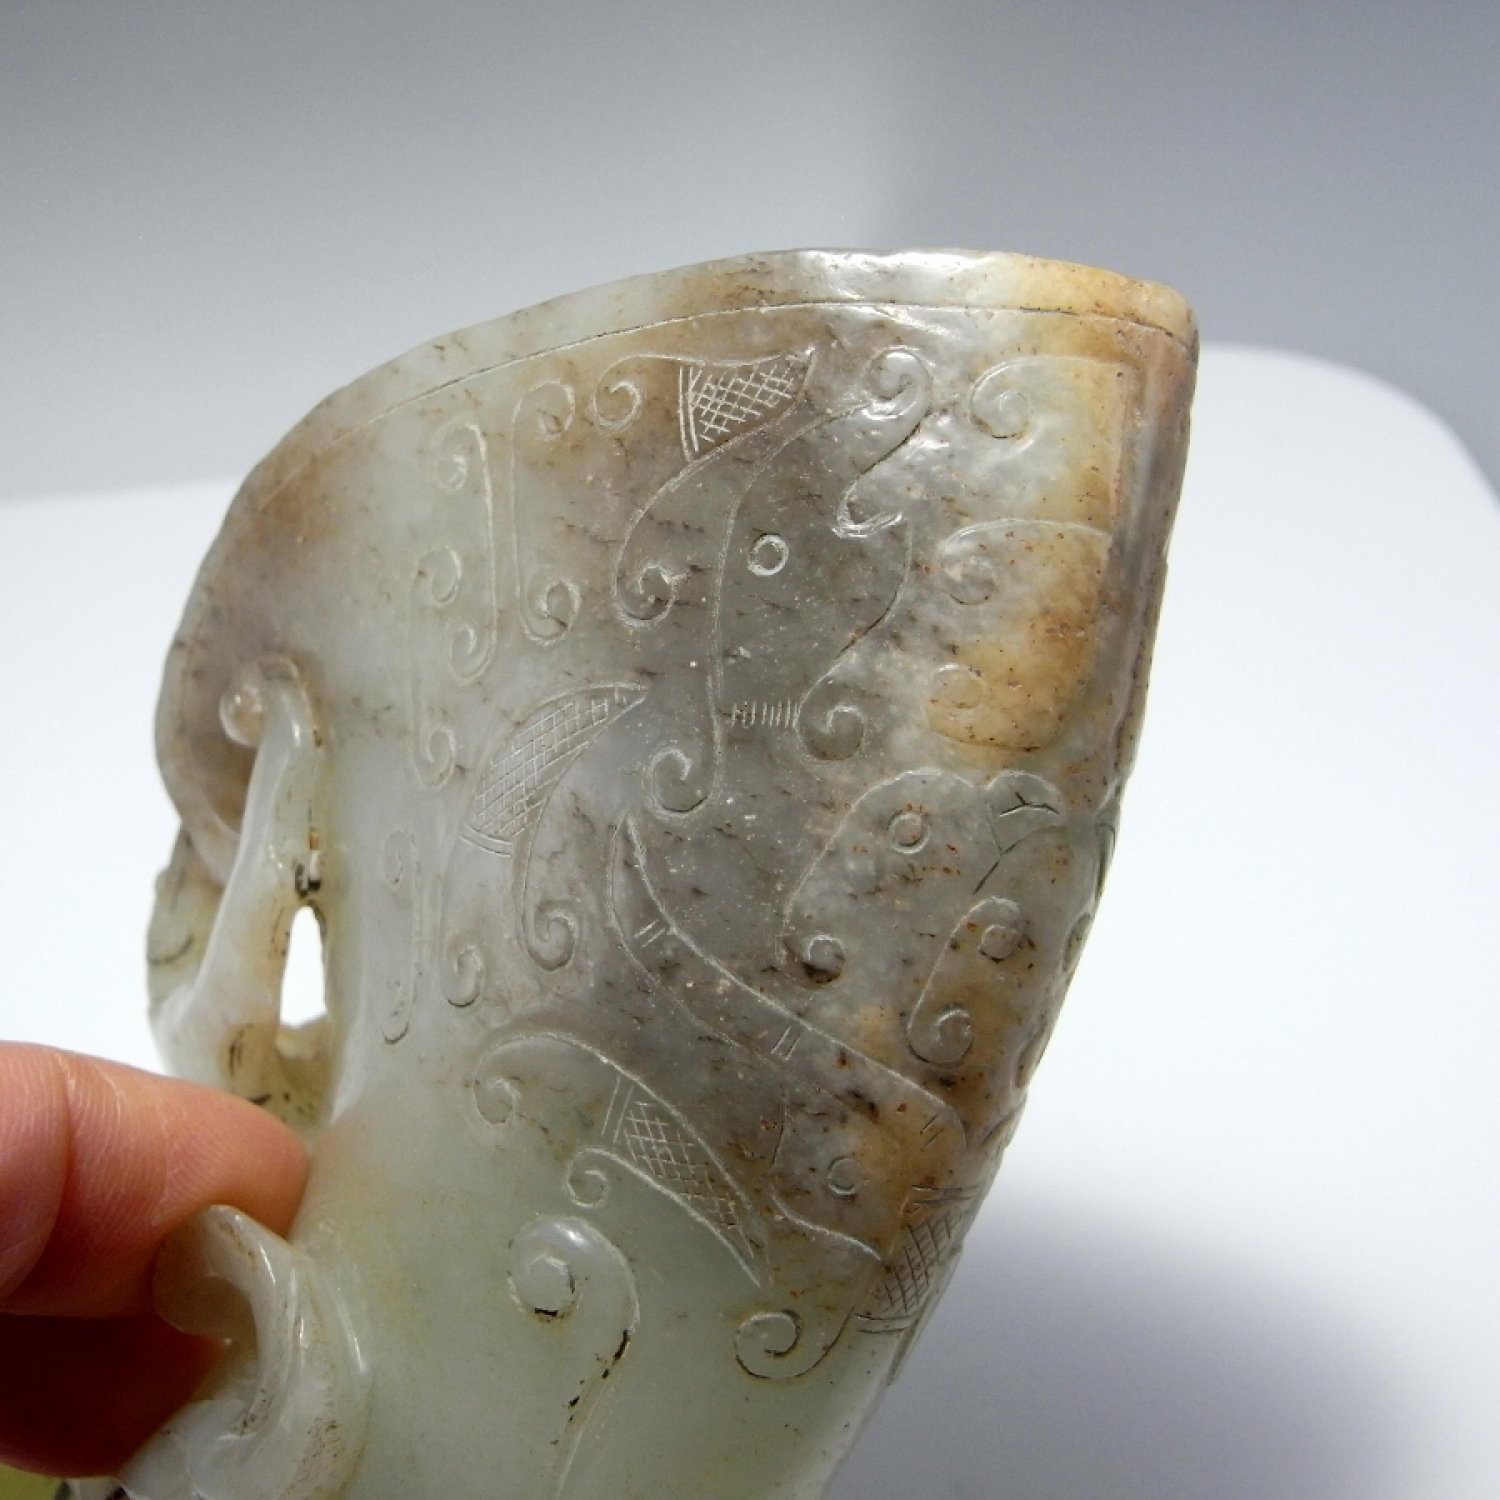 14th to 15th C MING DYNASTY Jade Rhyton Cup Carved Phoenix Statue Ornament Vessel Nephrite Jade Carving Ming Jade Ming Antiques Chinese